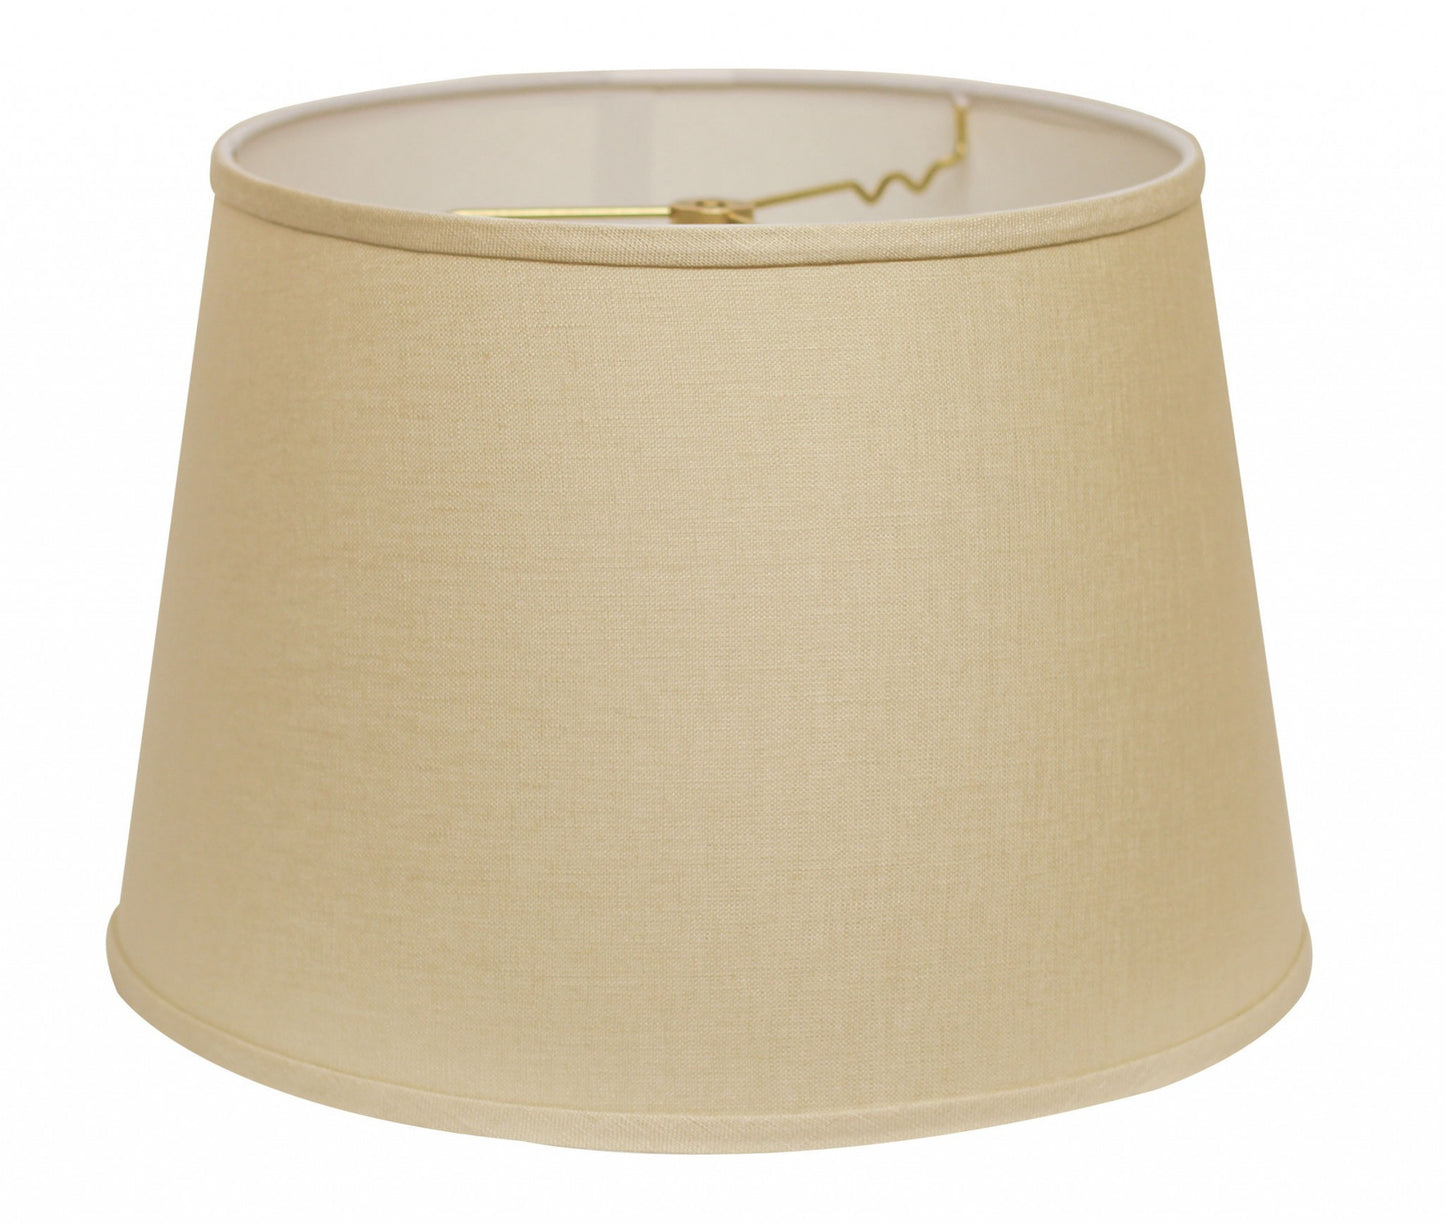 16" Parchment Biege Rounded Empire Slanted Linen Lampshade